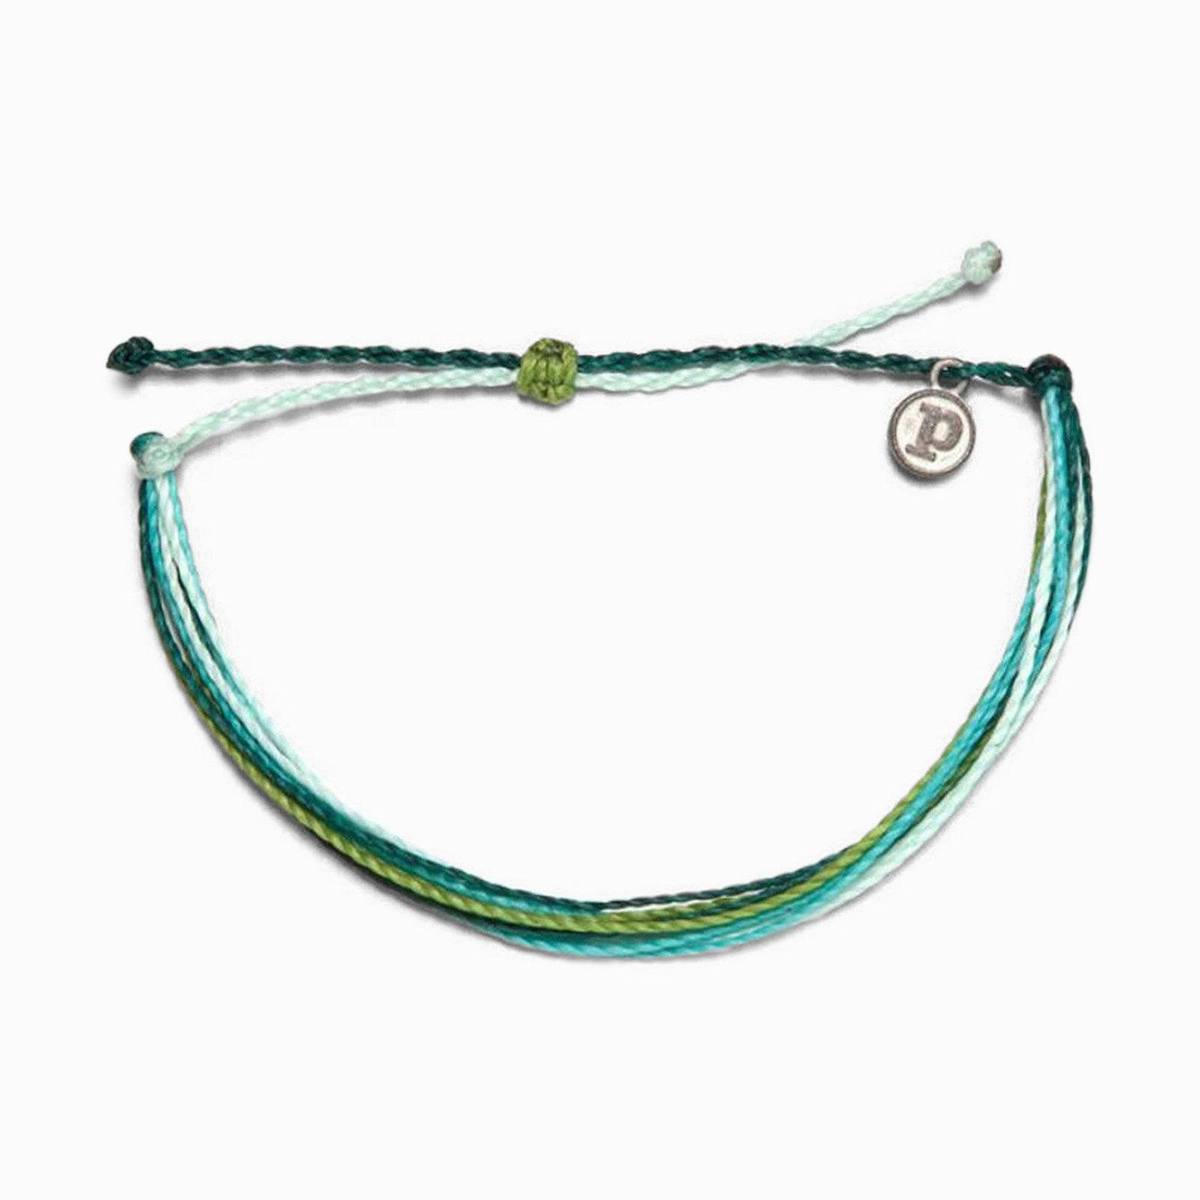 A purchase that goes to a great cause, these PuraVida bracelets provide jobs for the people of Costa Rica. Layer them up, with a variety of colors, pair them with our Pura Vida charm bracelets and wave rings. Perfect gift for a friend, collect them all.